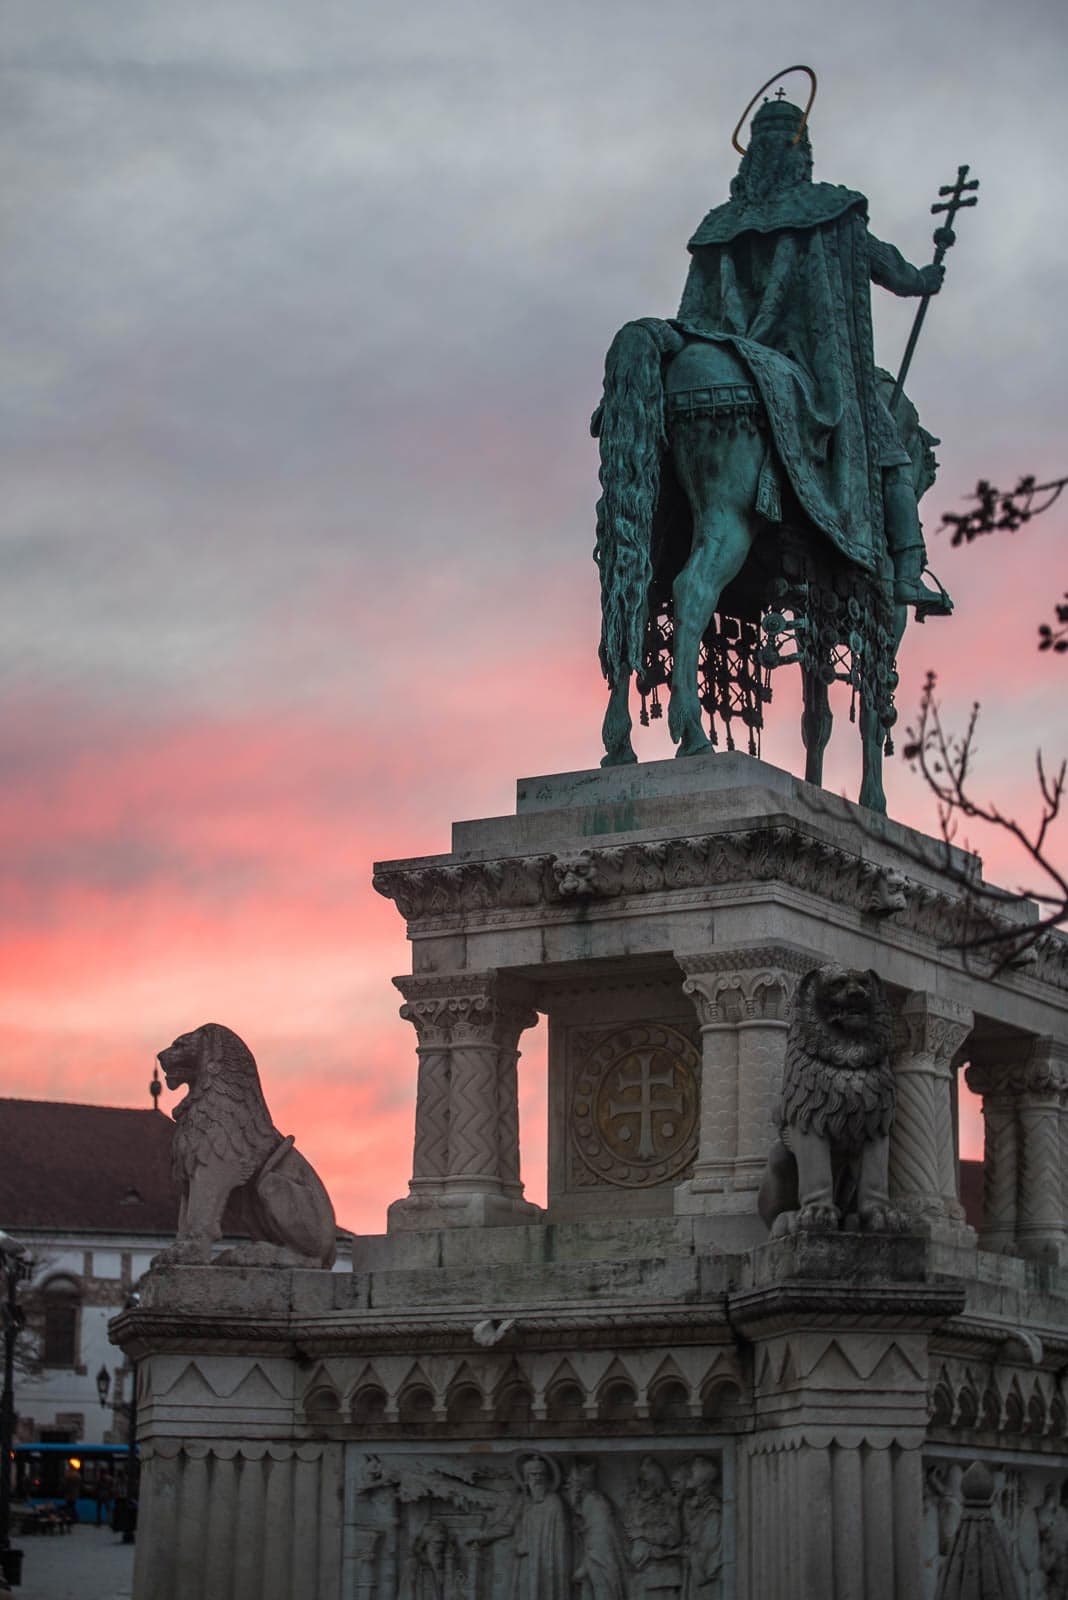 A statue of a man riding a horse in front of a sunset.